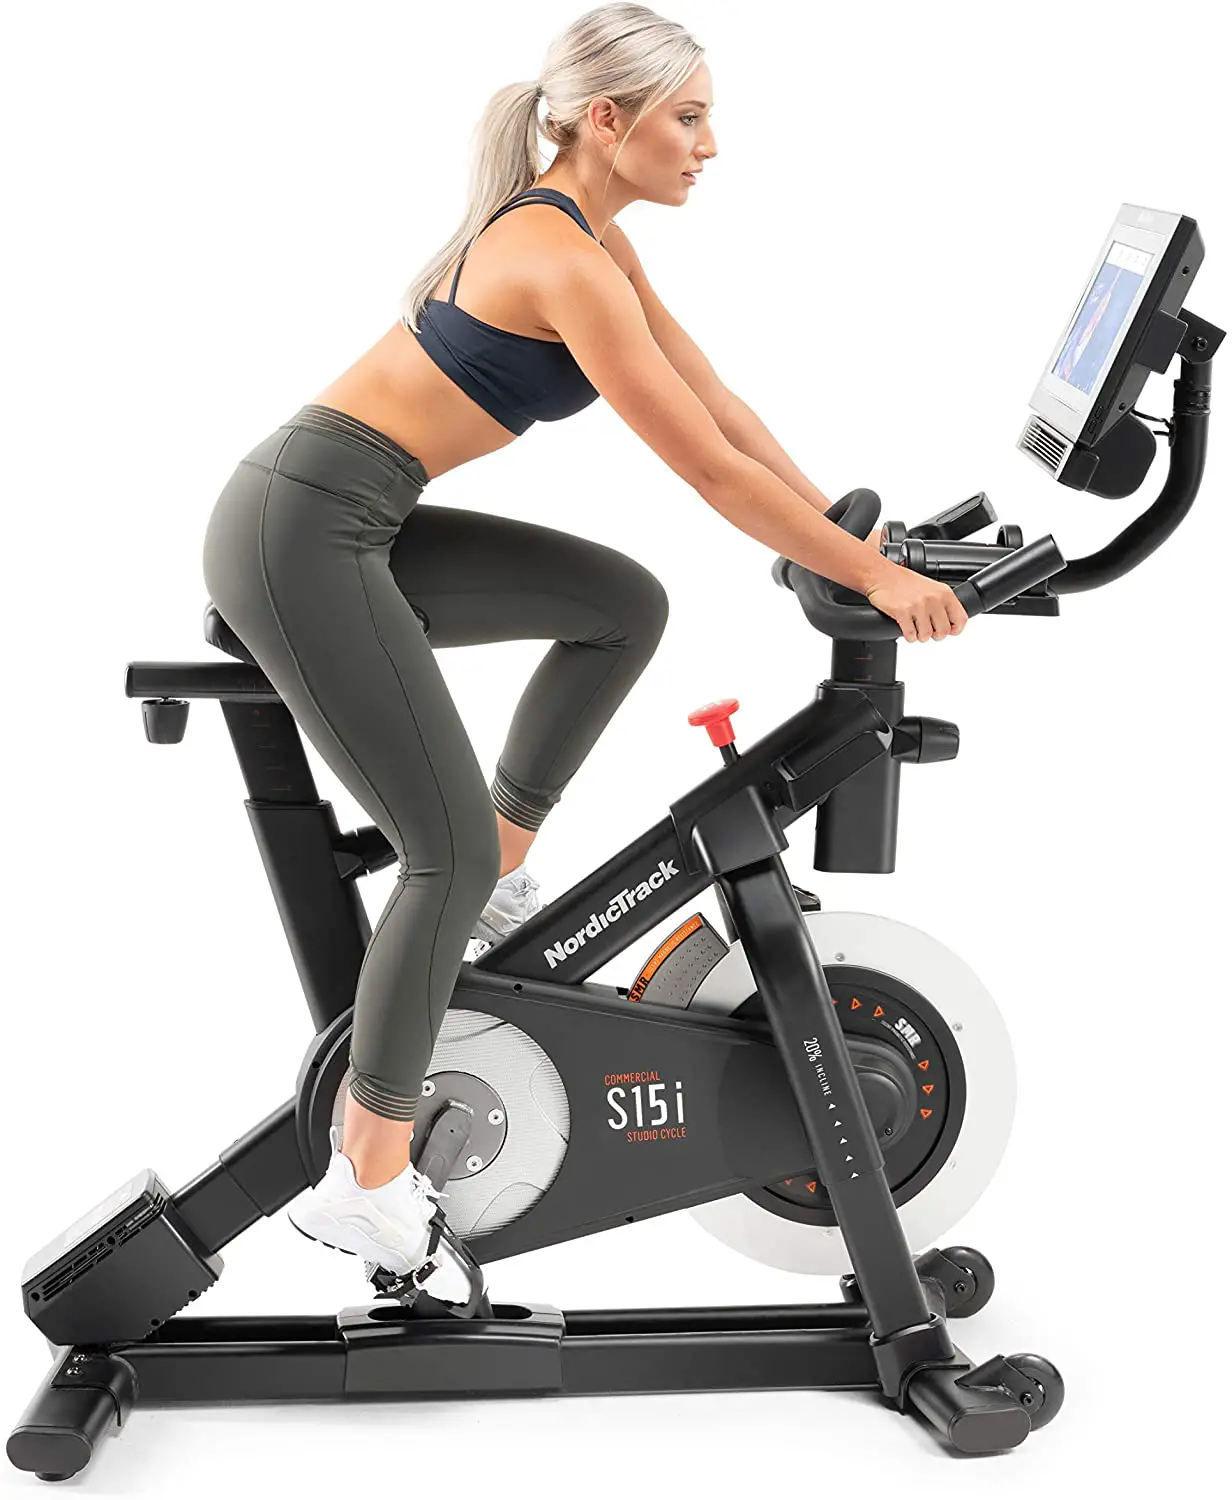 NordicTrack Commercial Vr21 Recumbent Bike Review